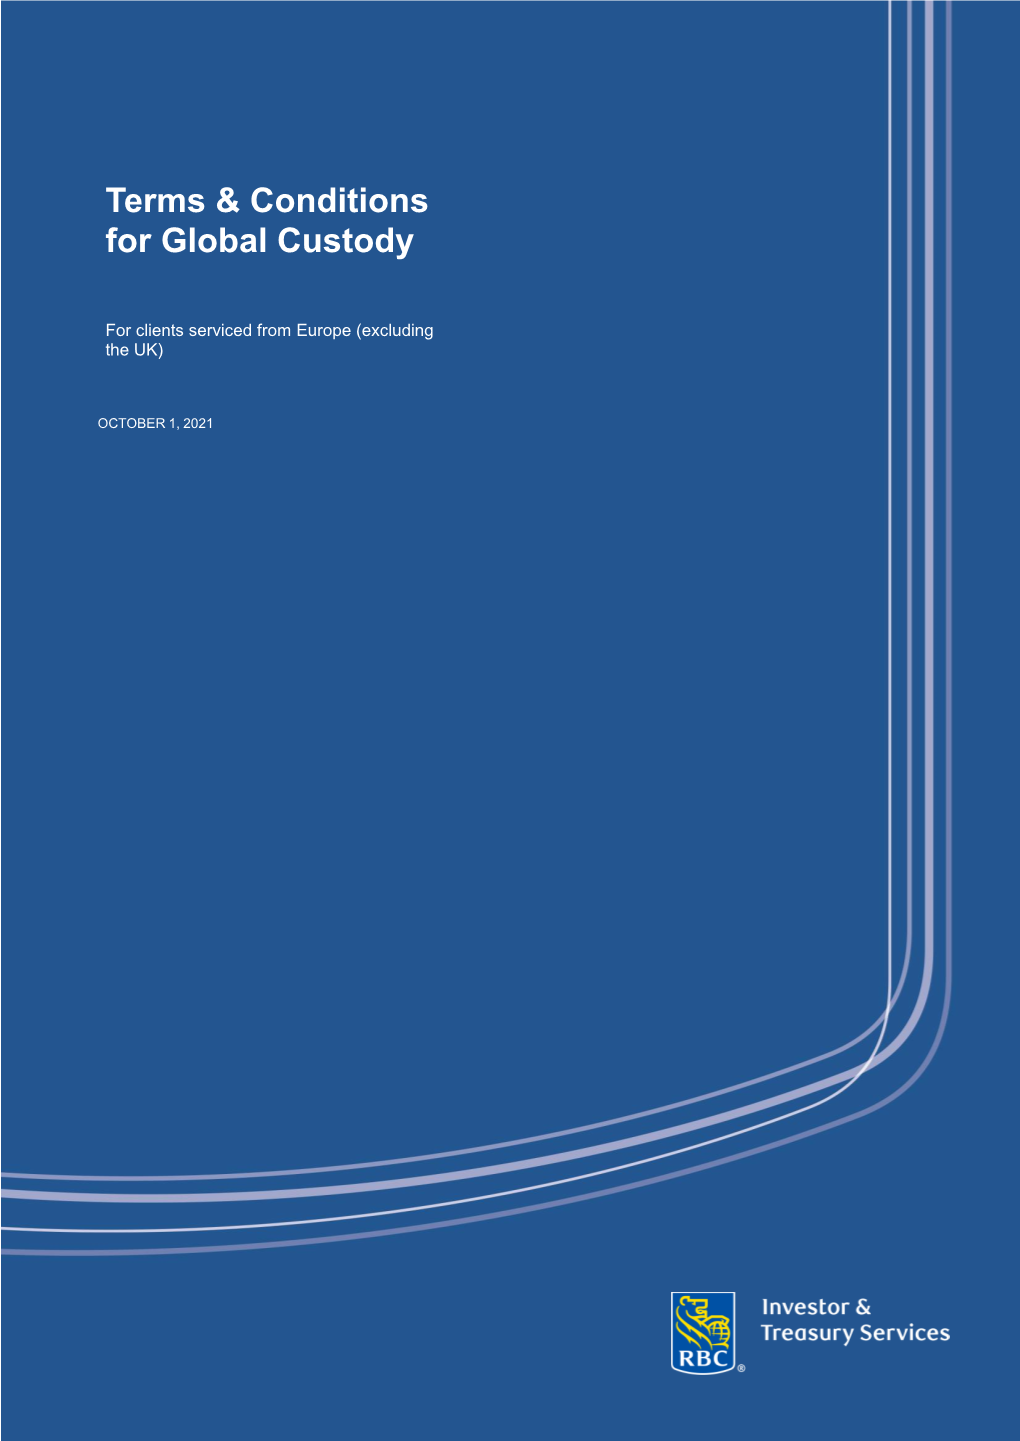 Terms & Conditions for Global Custody